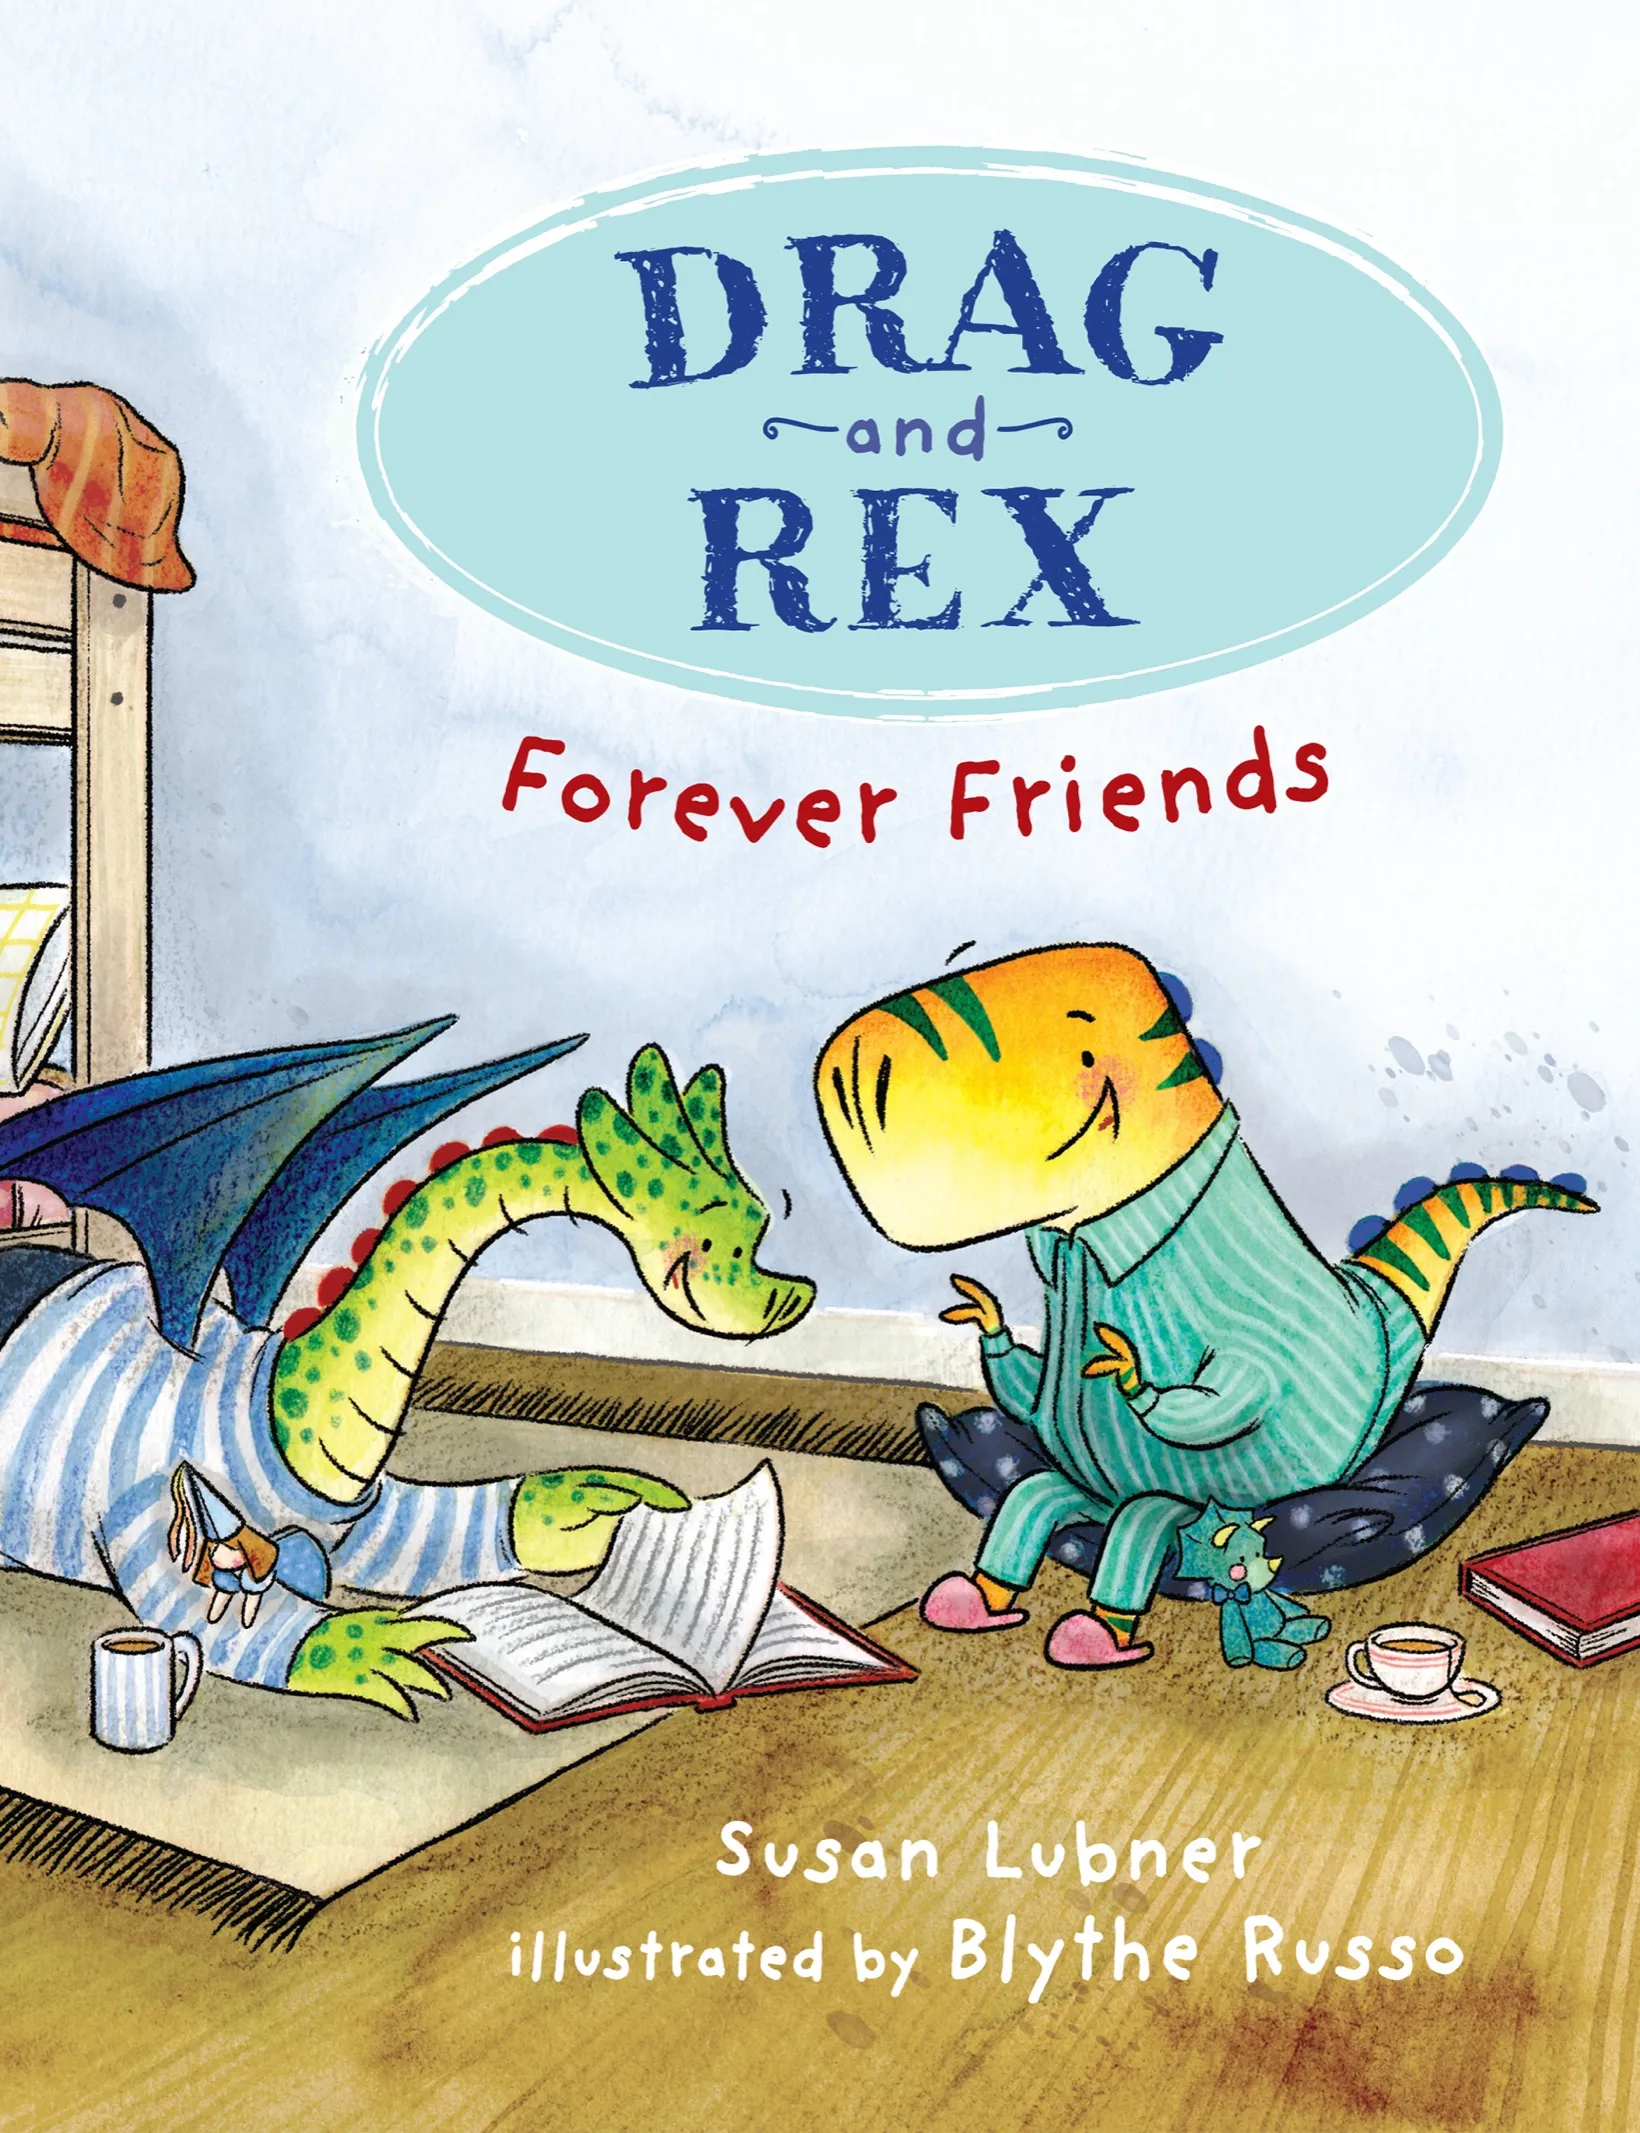 Forever Friends (Drag and Rex #1)